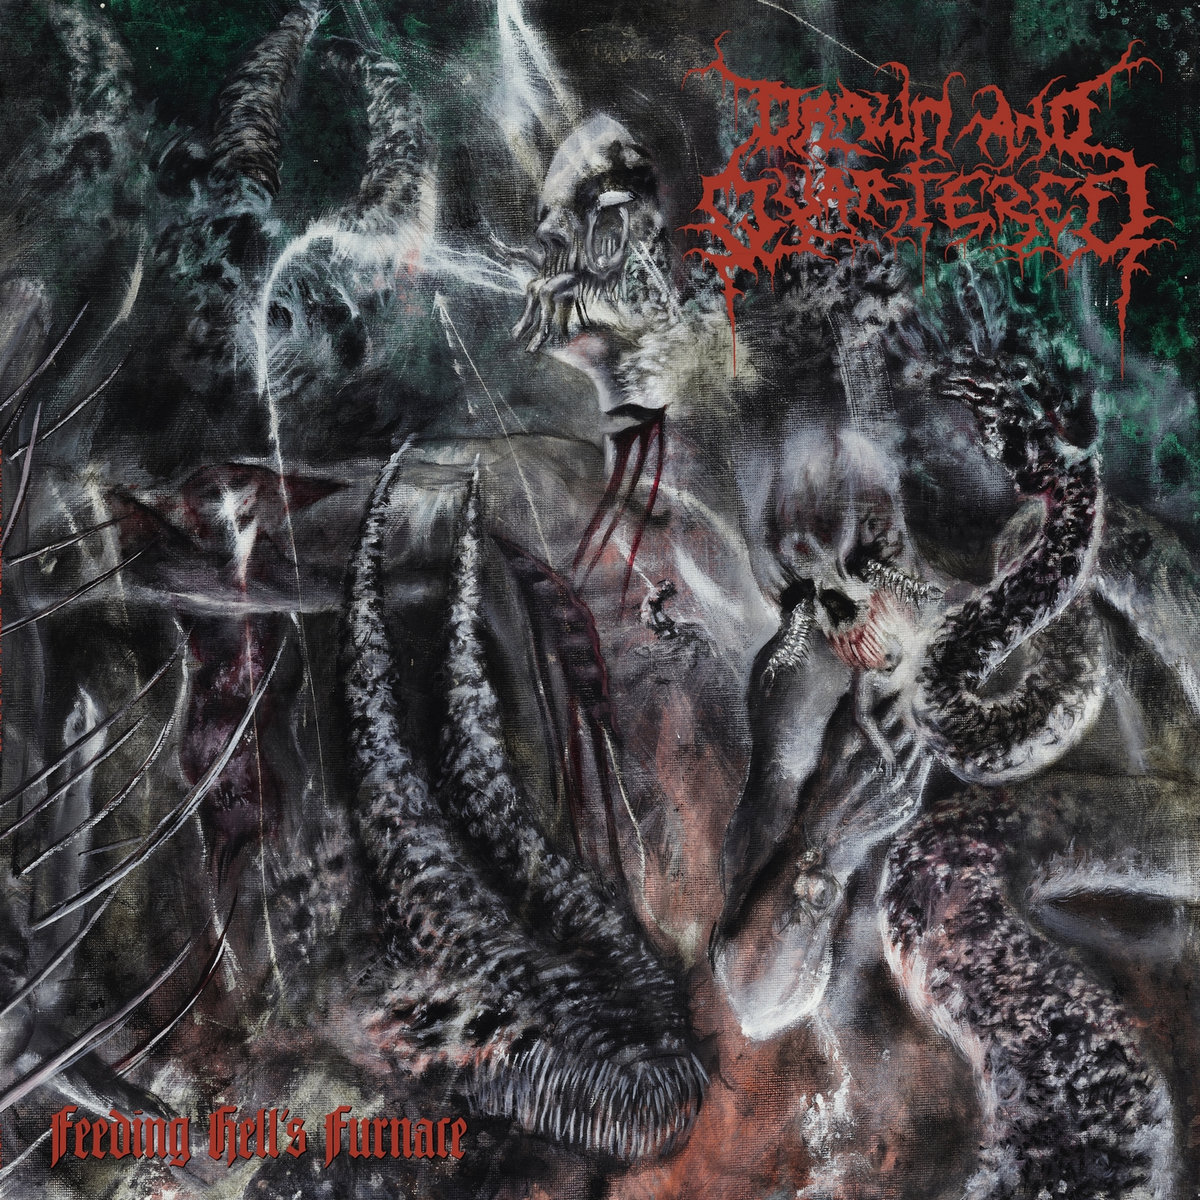 drawn and quartered – feeding hell’s furnace